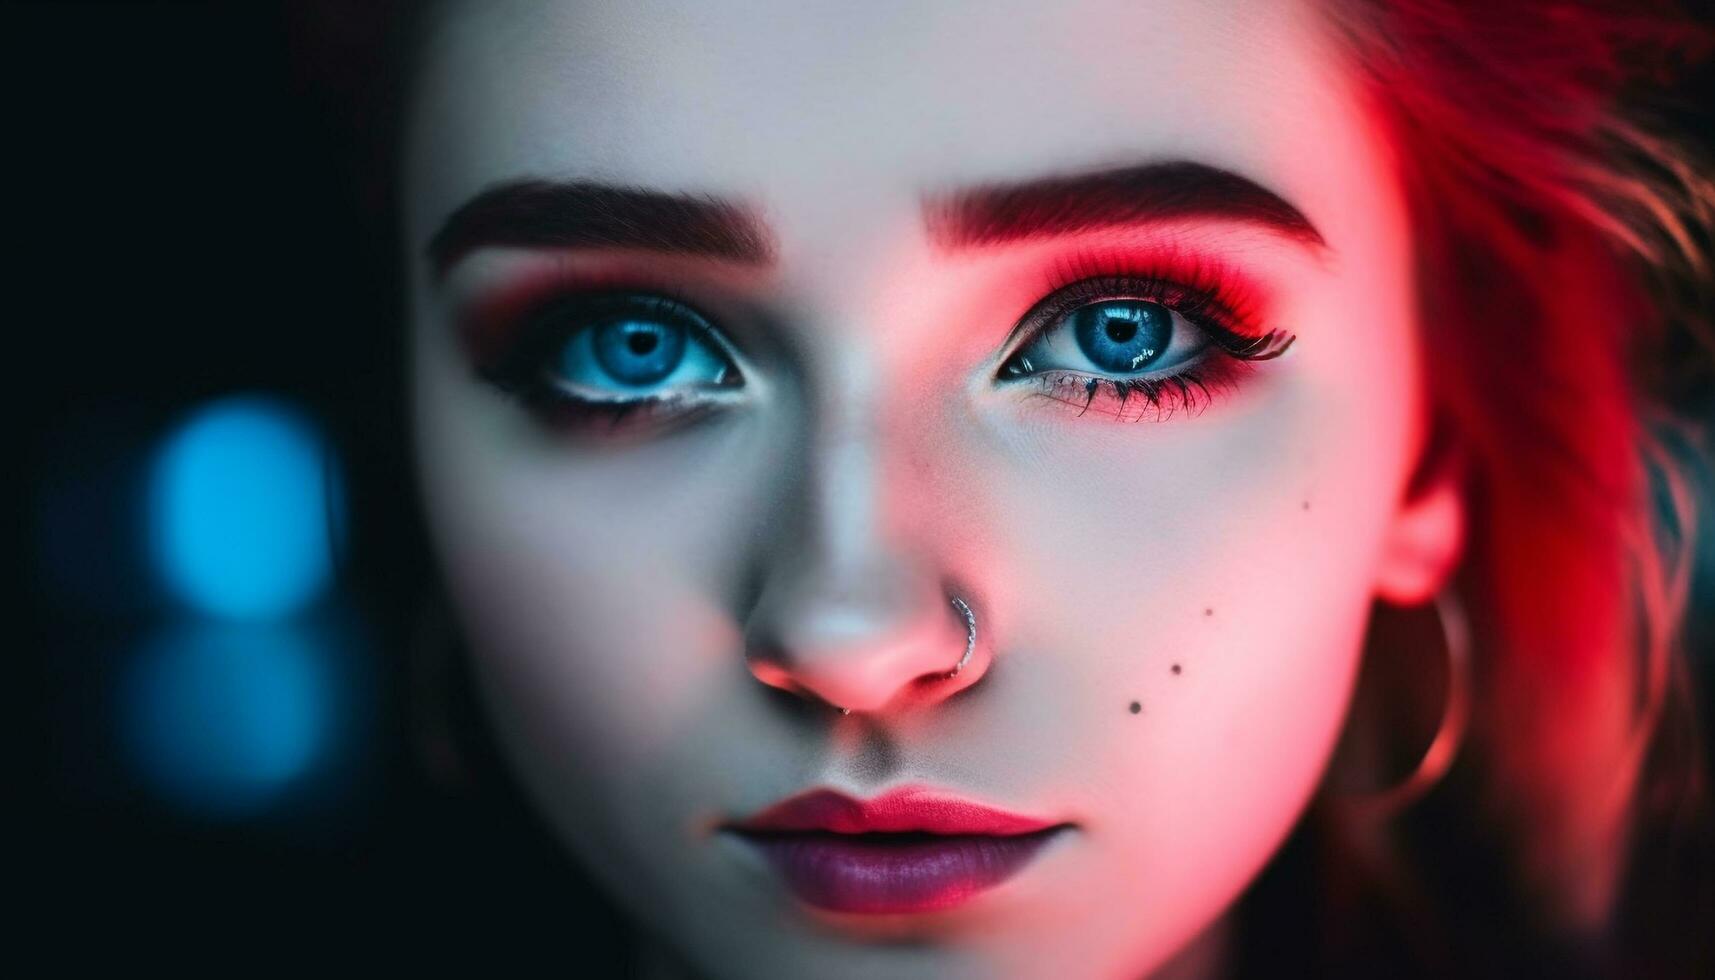 A young woman beauty shines through in this close up portrait generated by AI photo